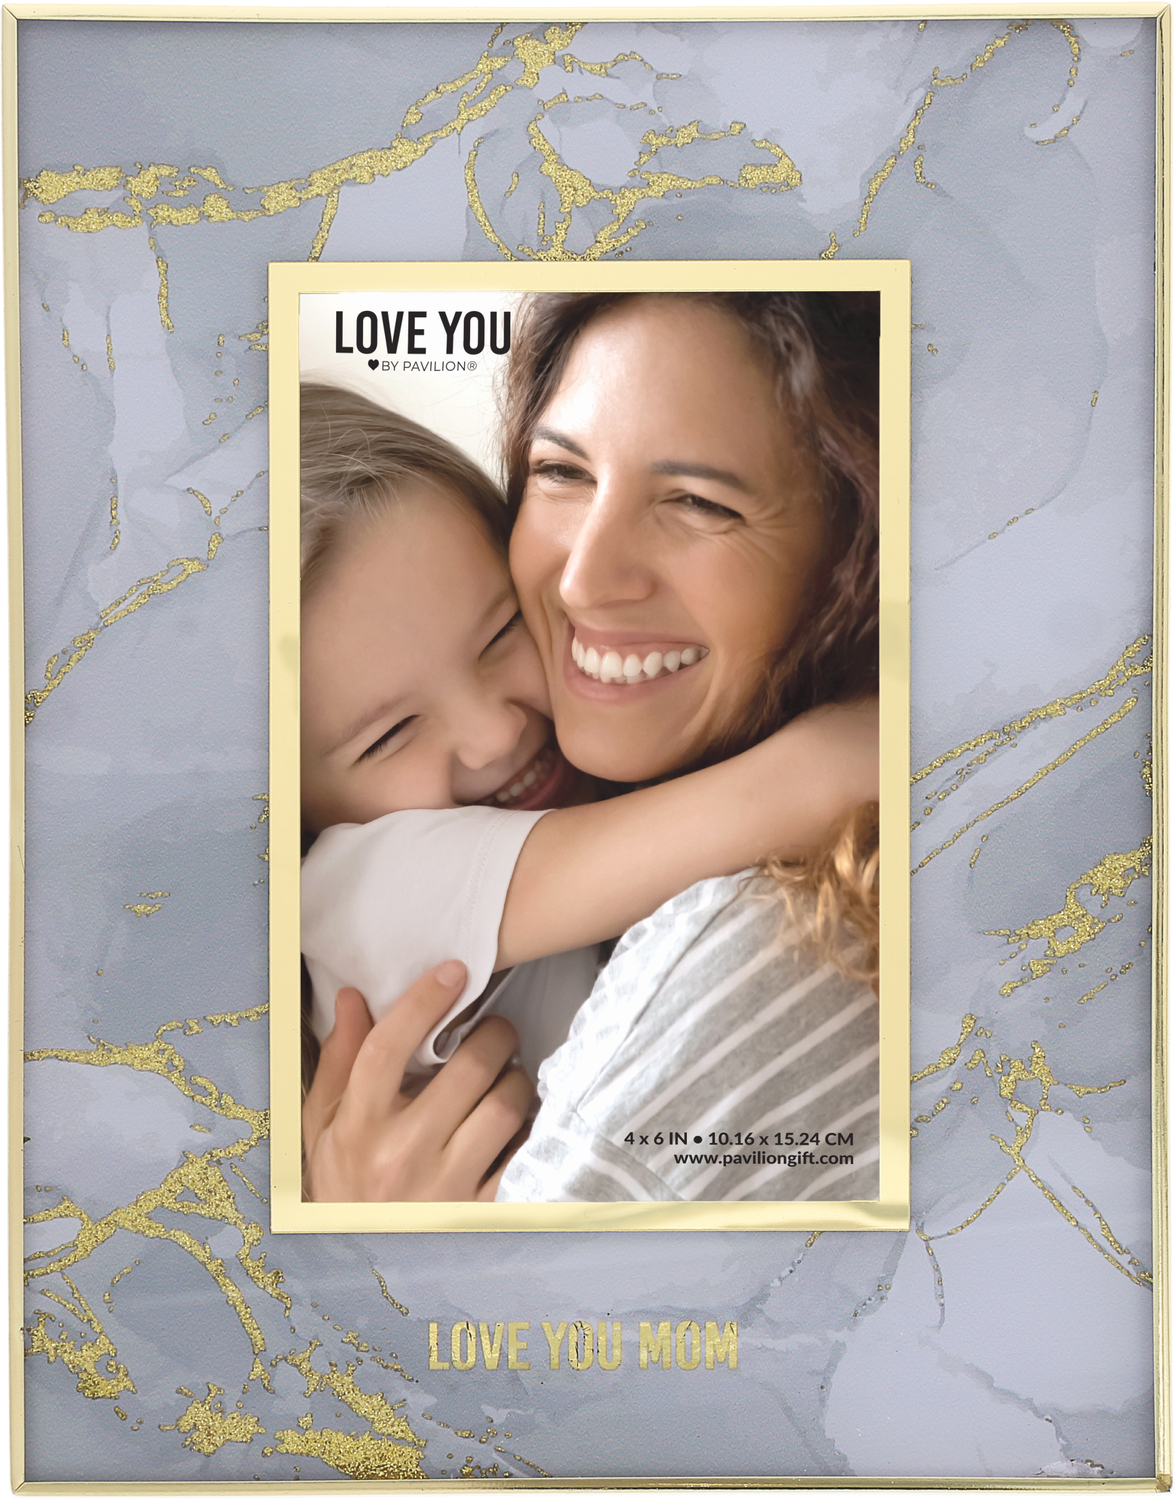 Love You Mom by Love You - Love You Mom - 7.25" x 9.75"  Frame
(Holds 4" x 6" Photo)